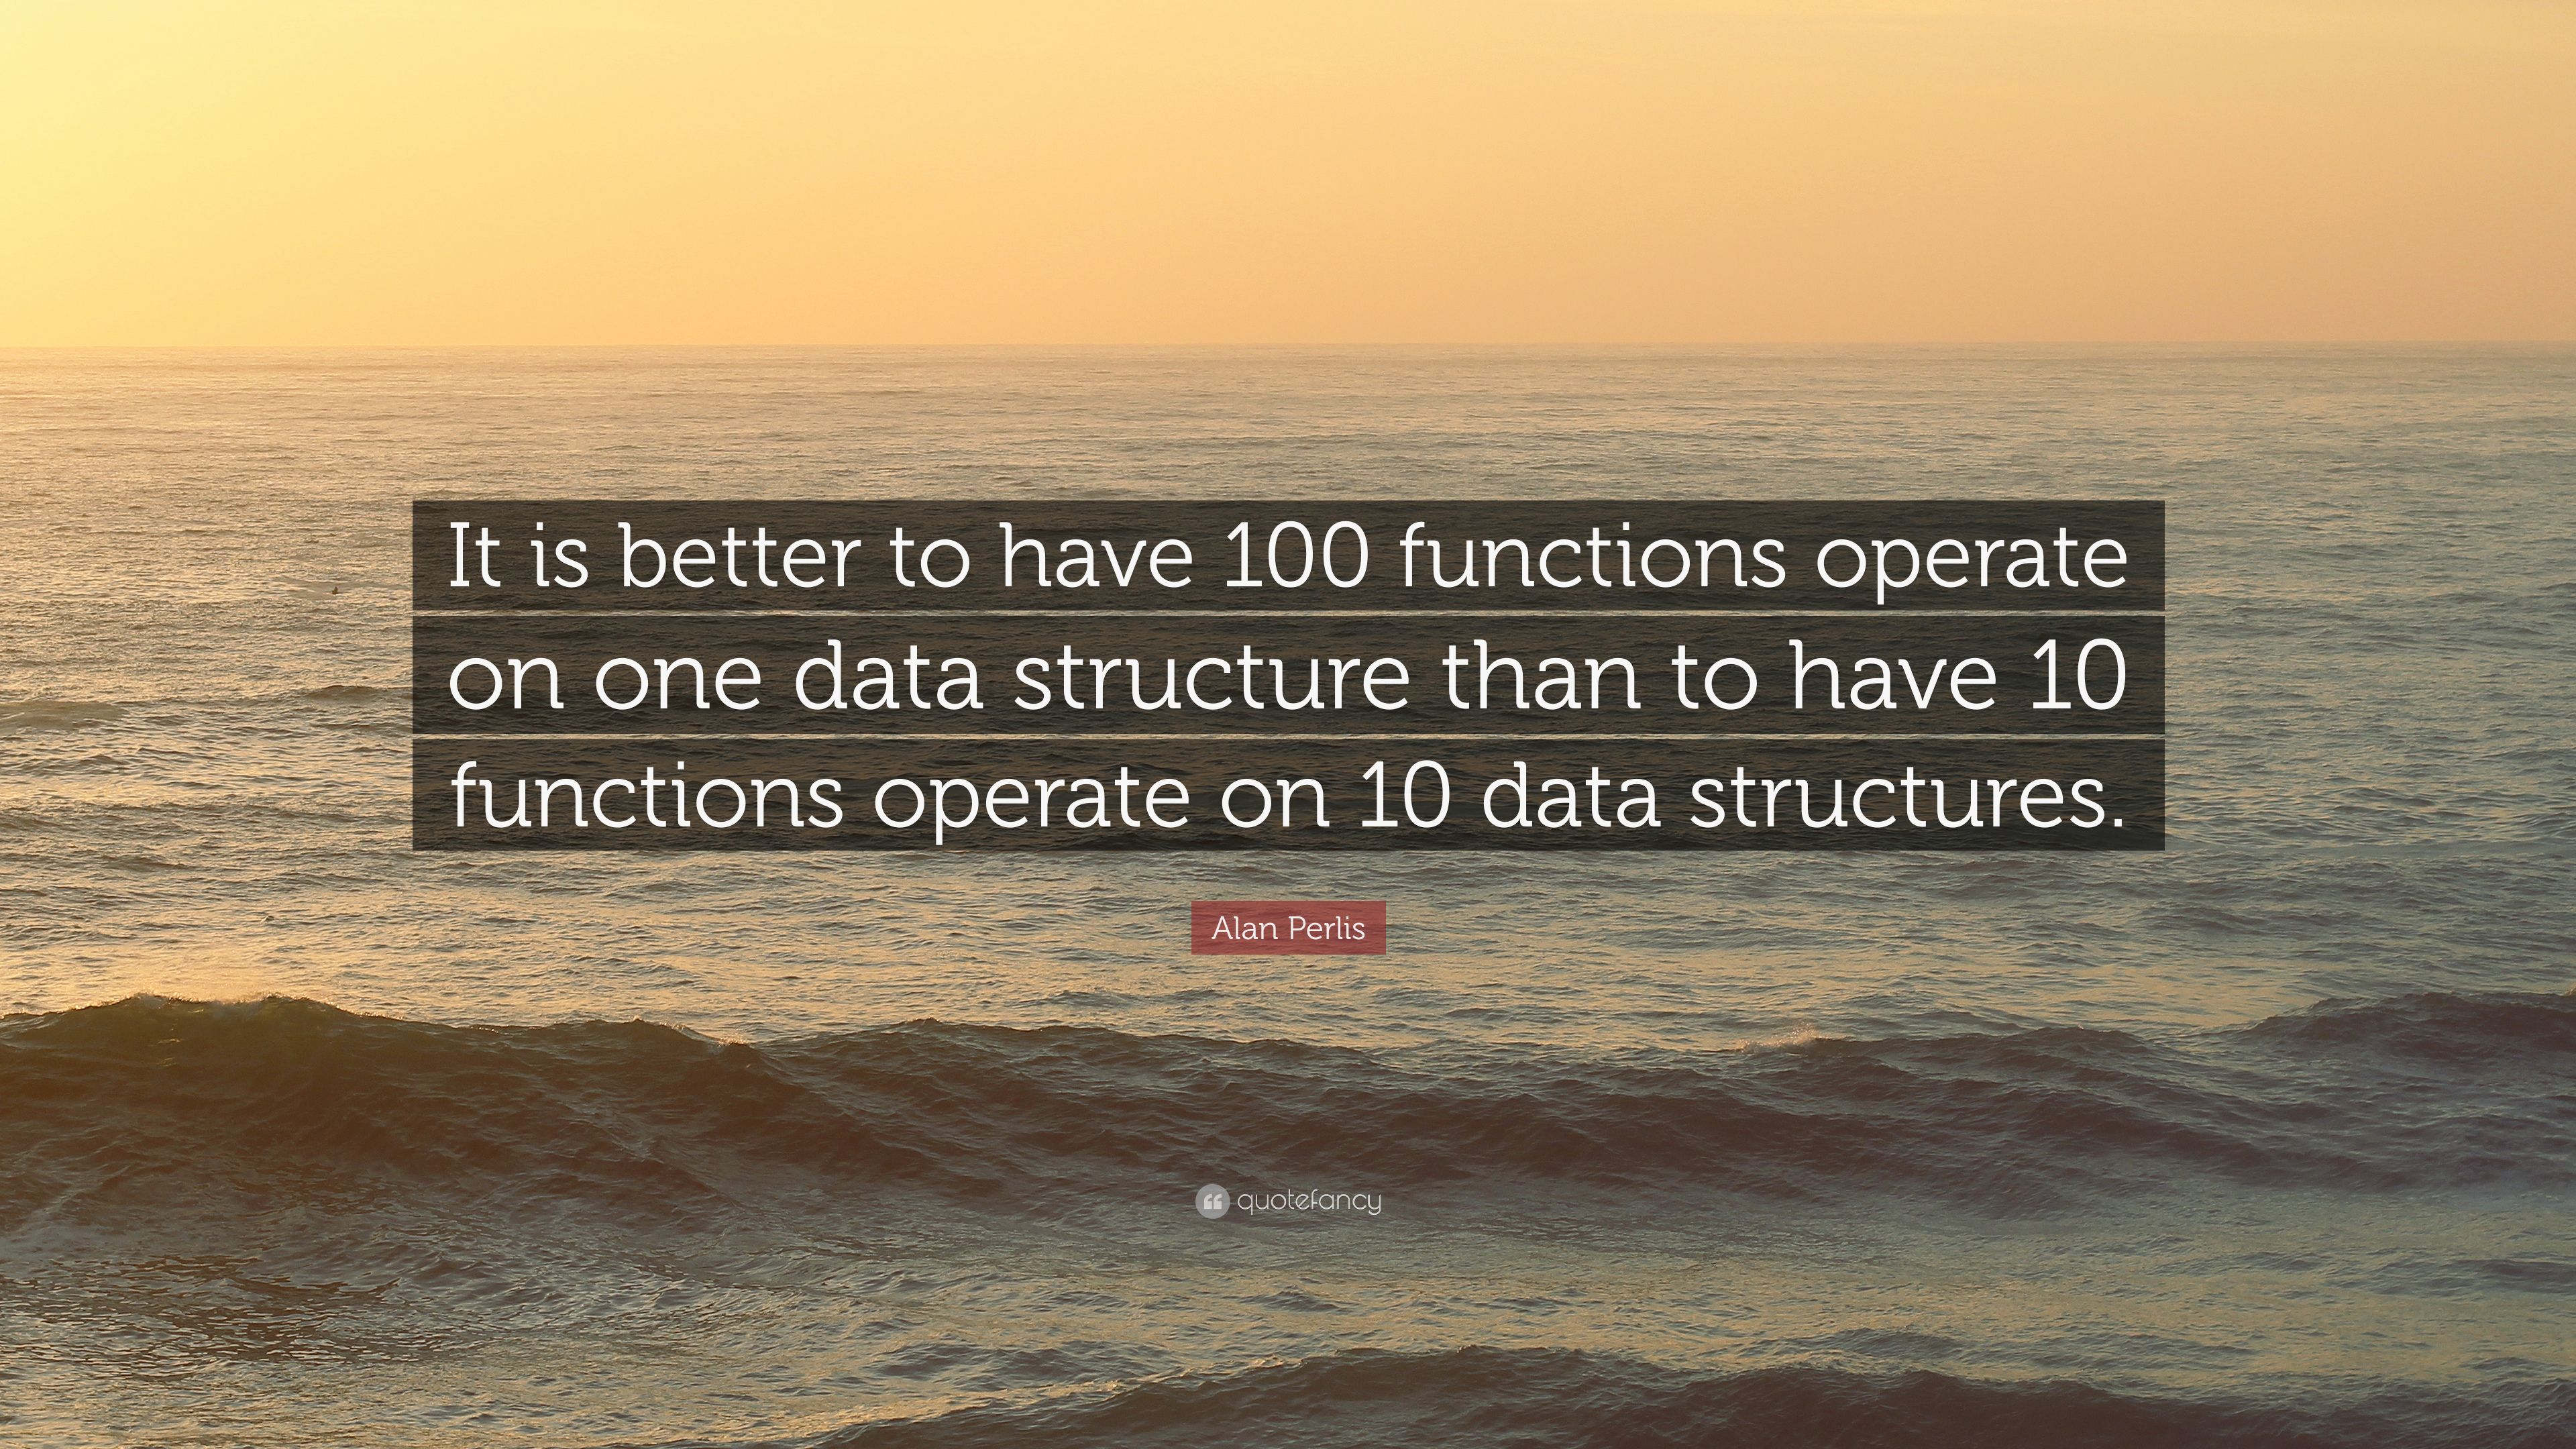 Alan Perlis Quote: “It is better to have 100 functions operate